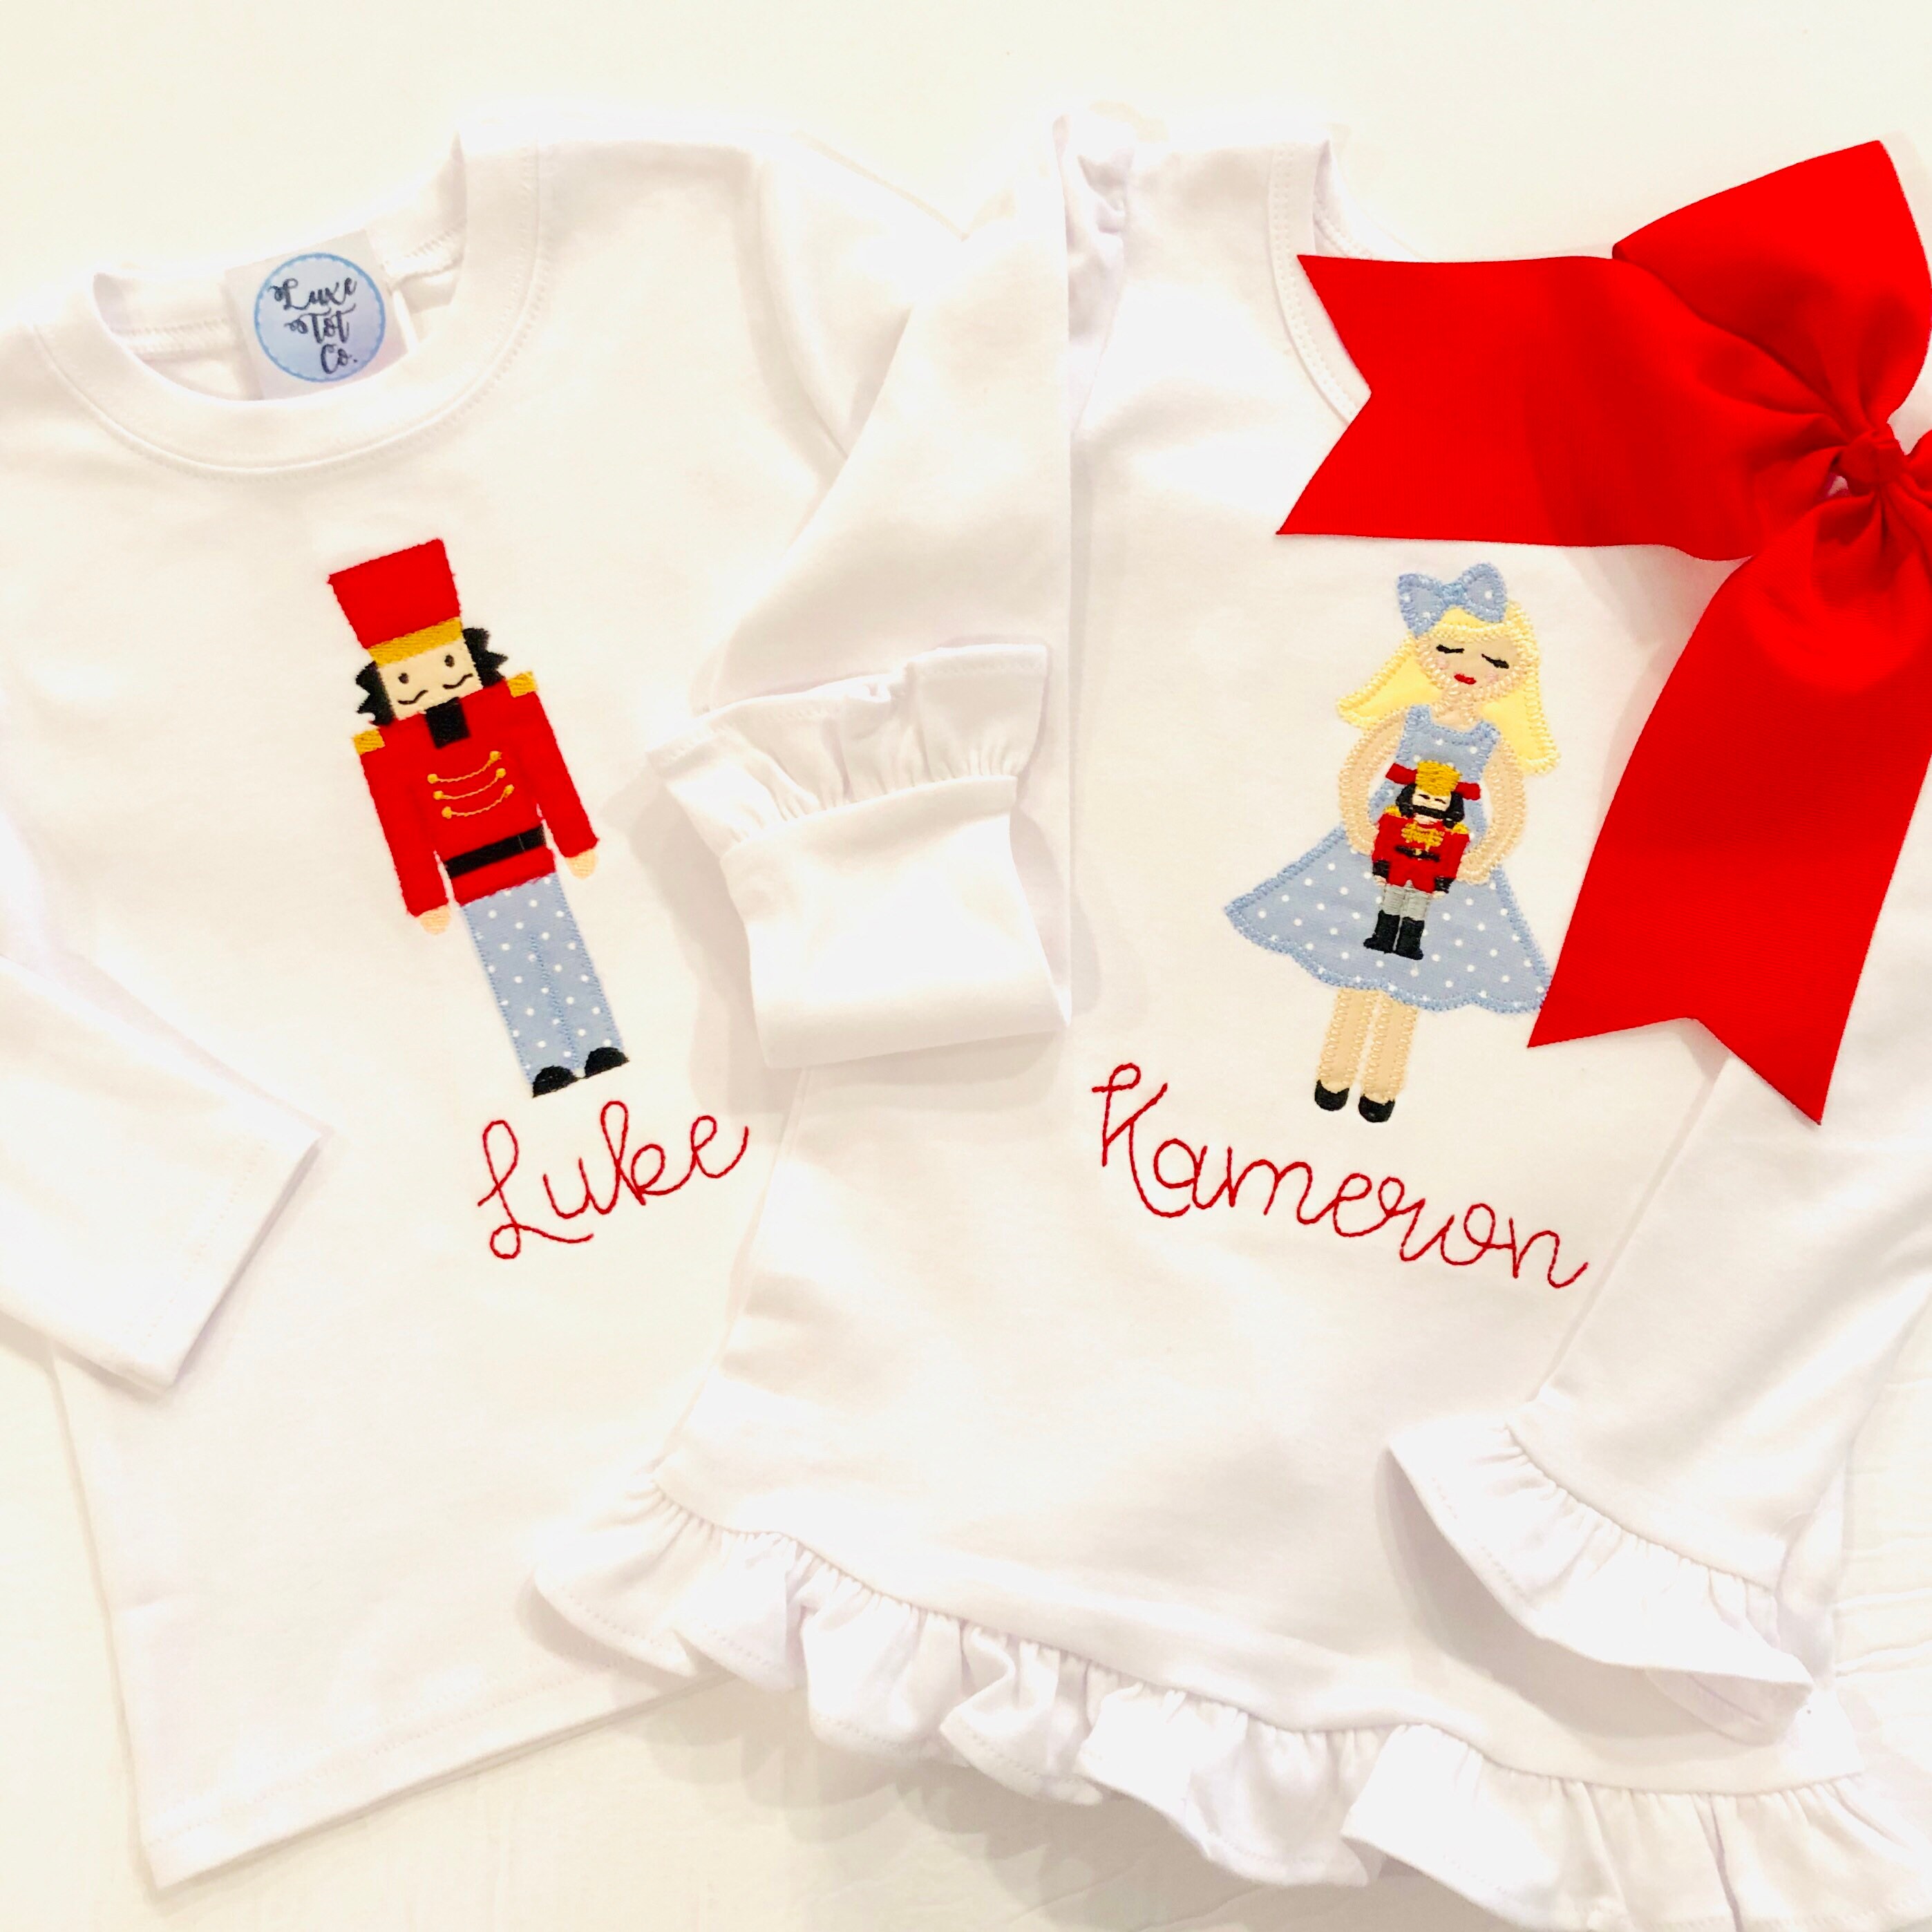 Little English | Toy Soldier Sweater - Little Boy's Holiday Clothing 5